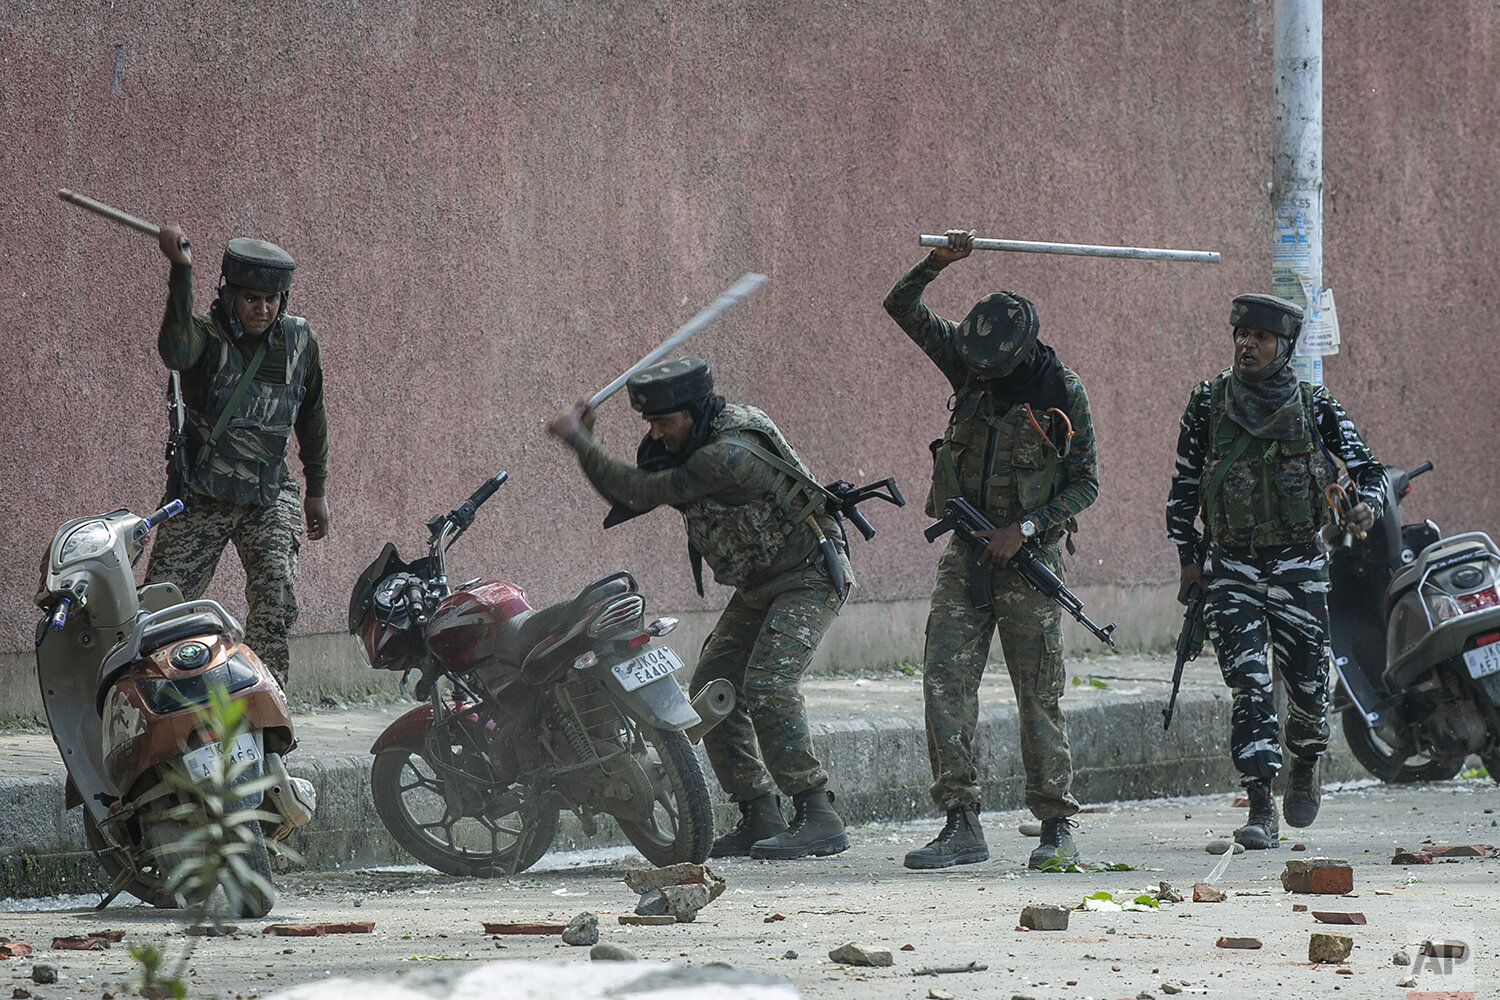  Indian paramilitary soldiers break motorbikes parked outside a college as they clash with students protesting against the alleged rape of a 3-year-old girl in Srinagar, Indian controlled Kashmir, May 14, 2019. (AP Photo/Dar Yasin) 